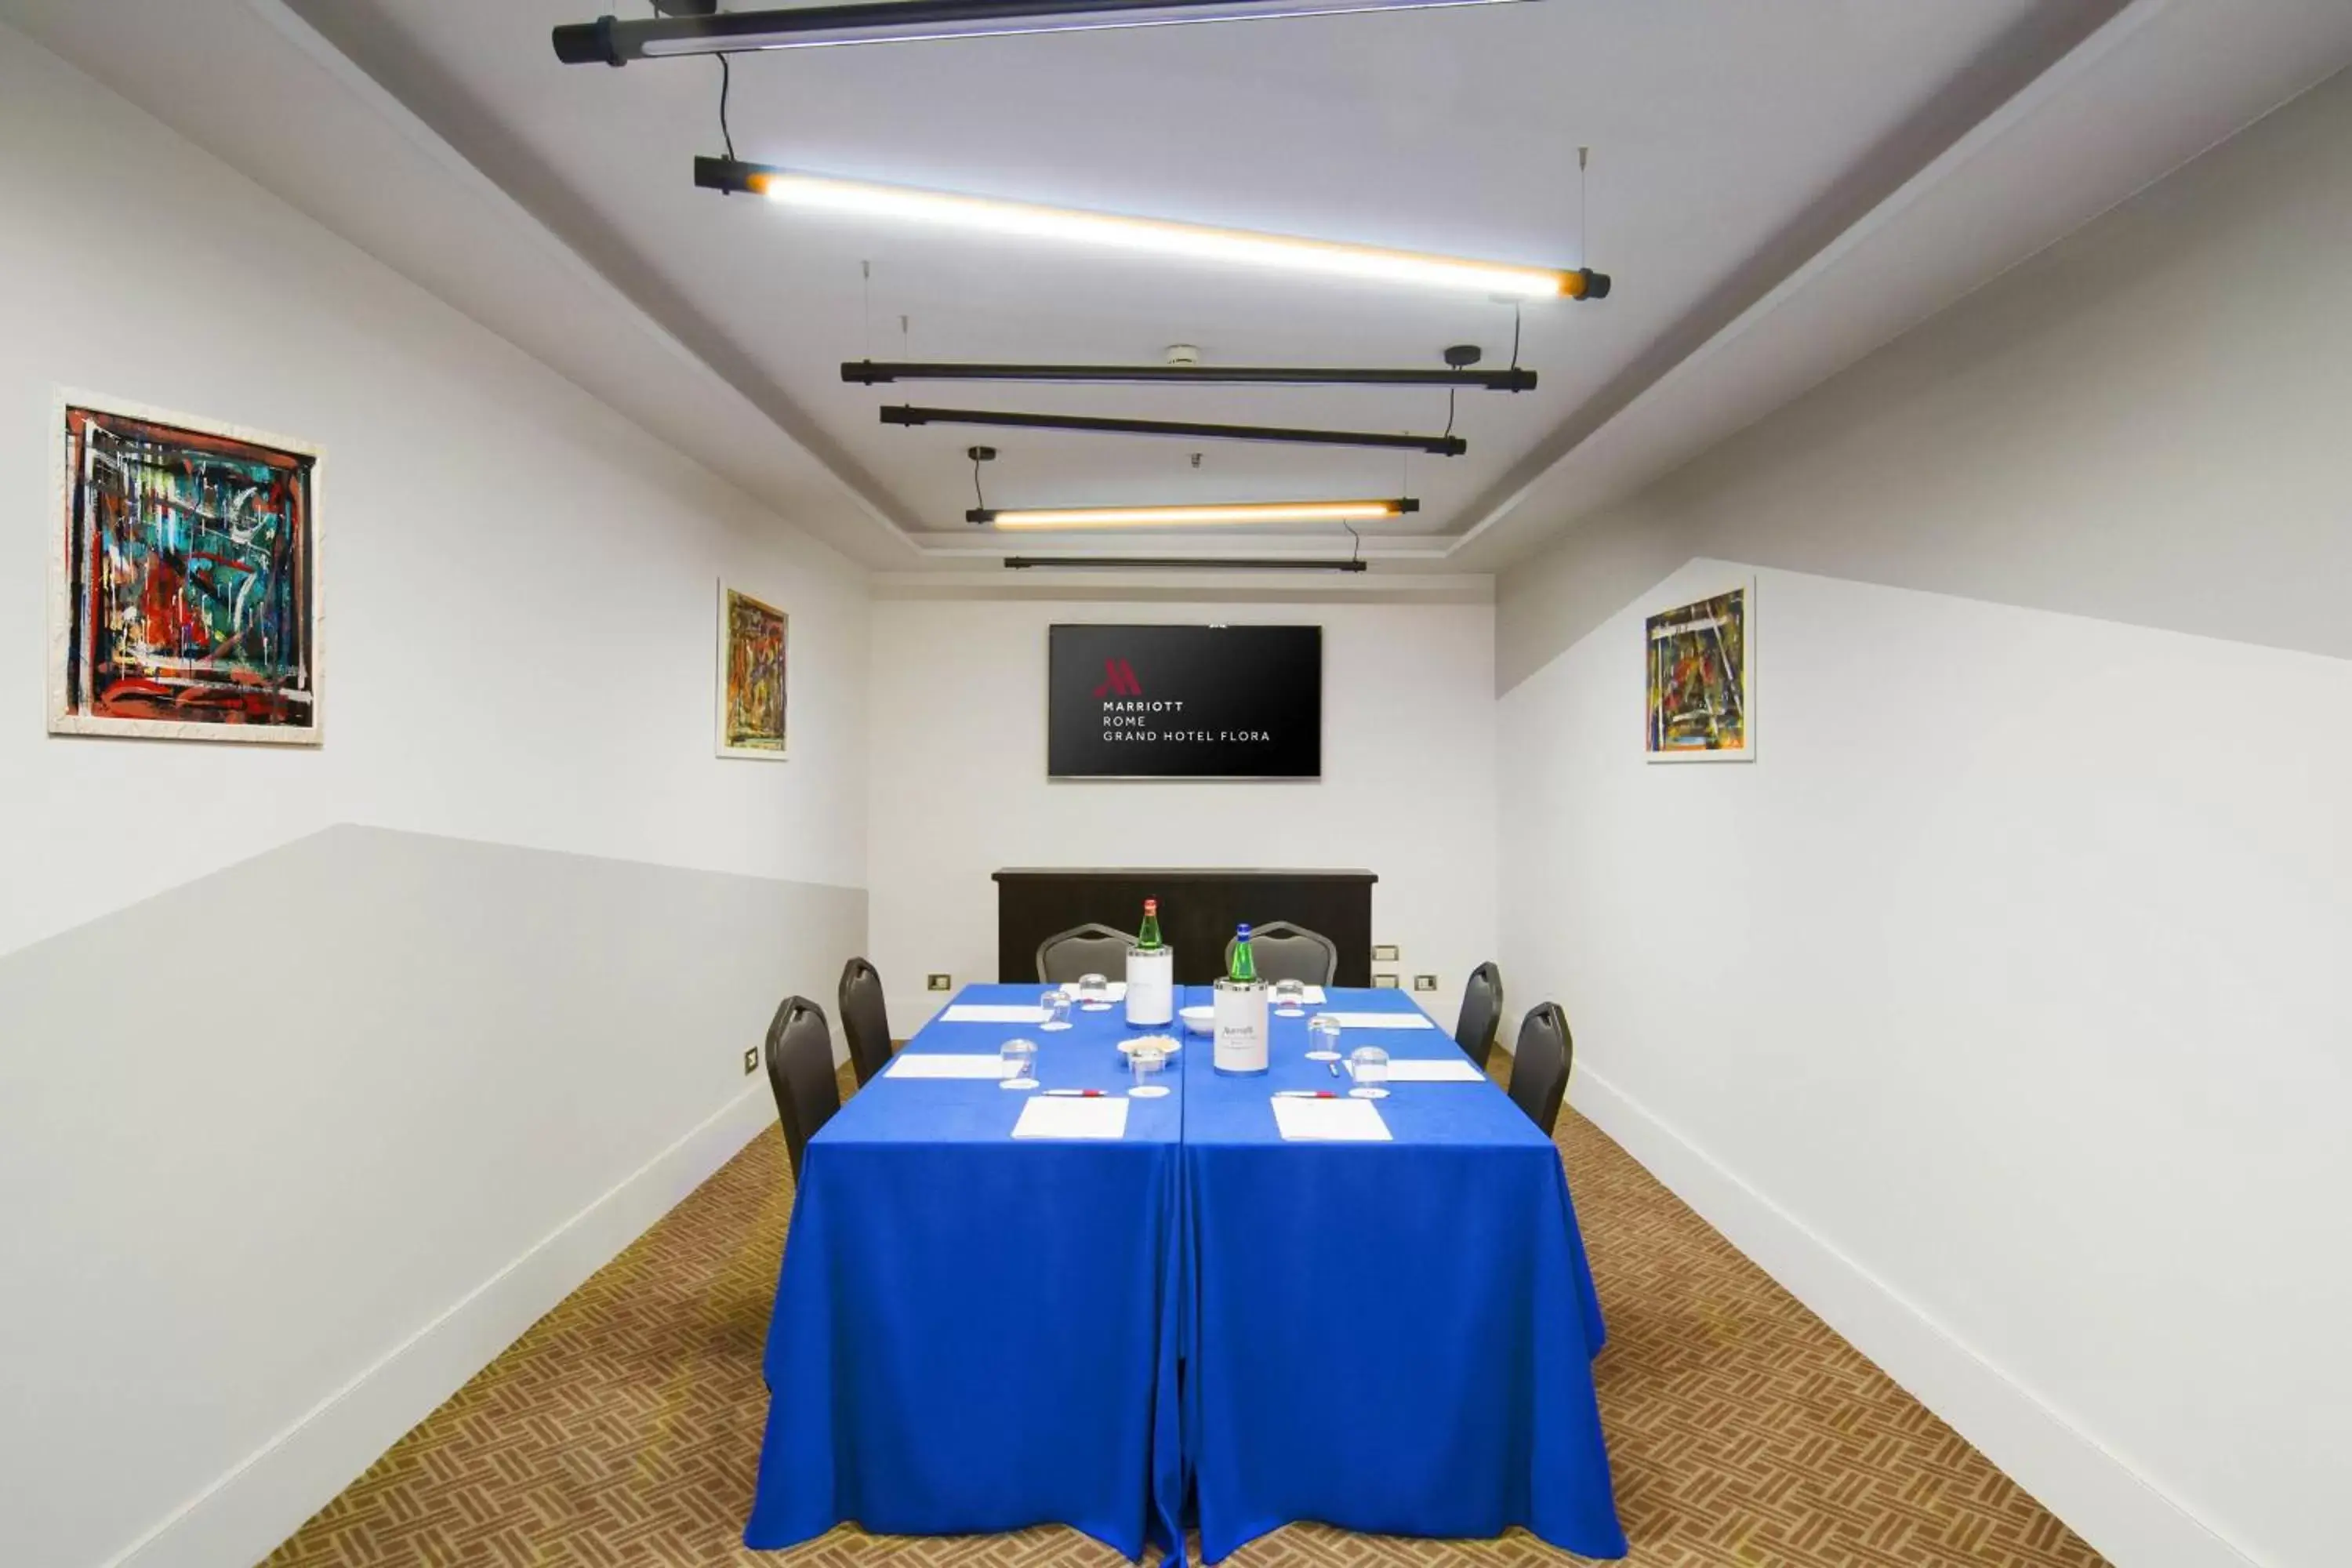 Meeting/conference room in Rome Marriott Grand Hotel Flora